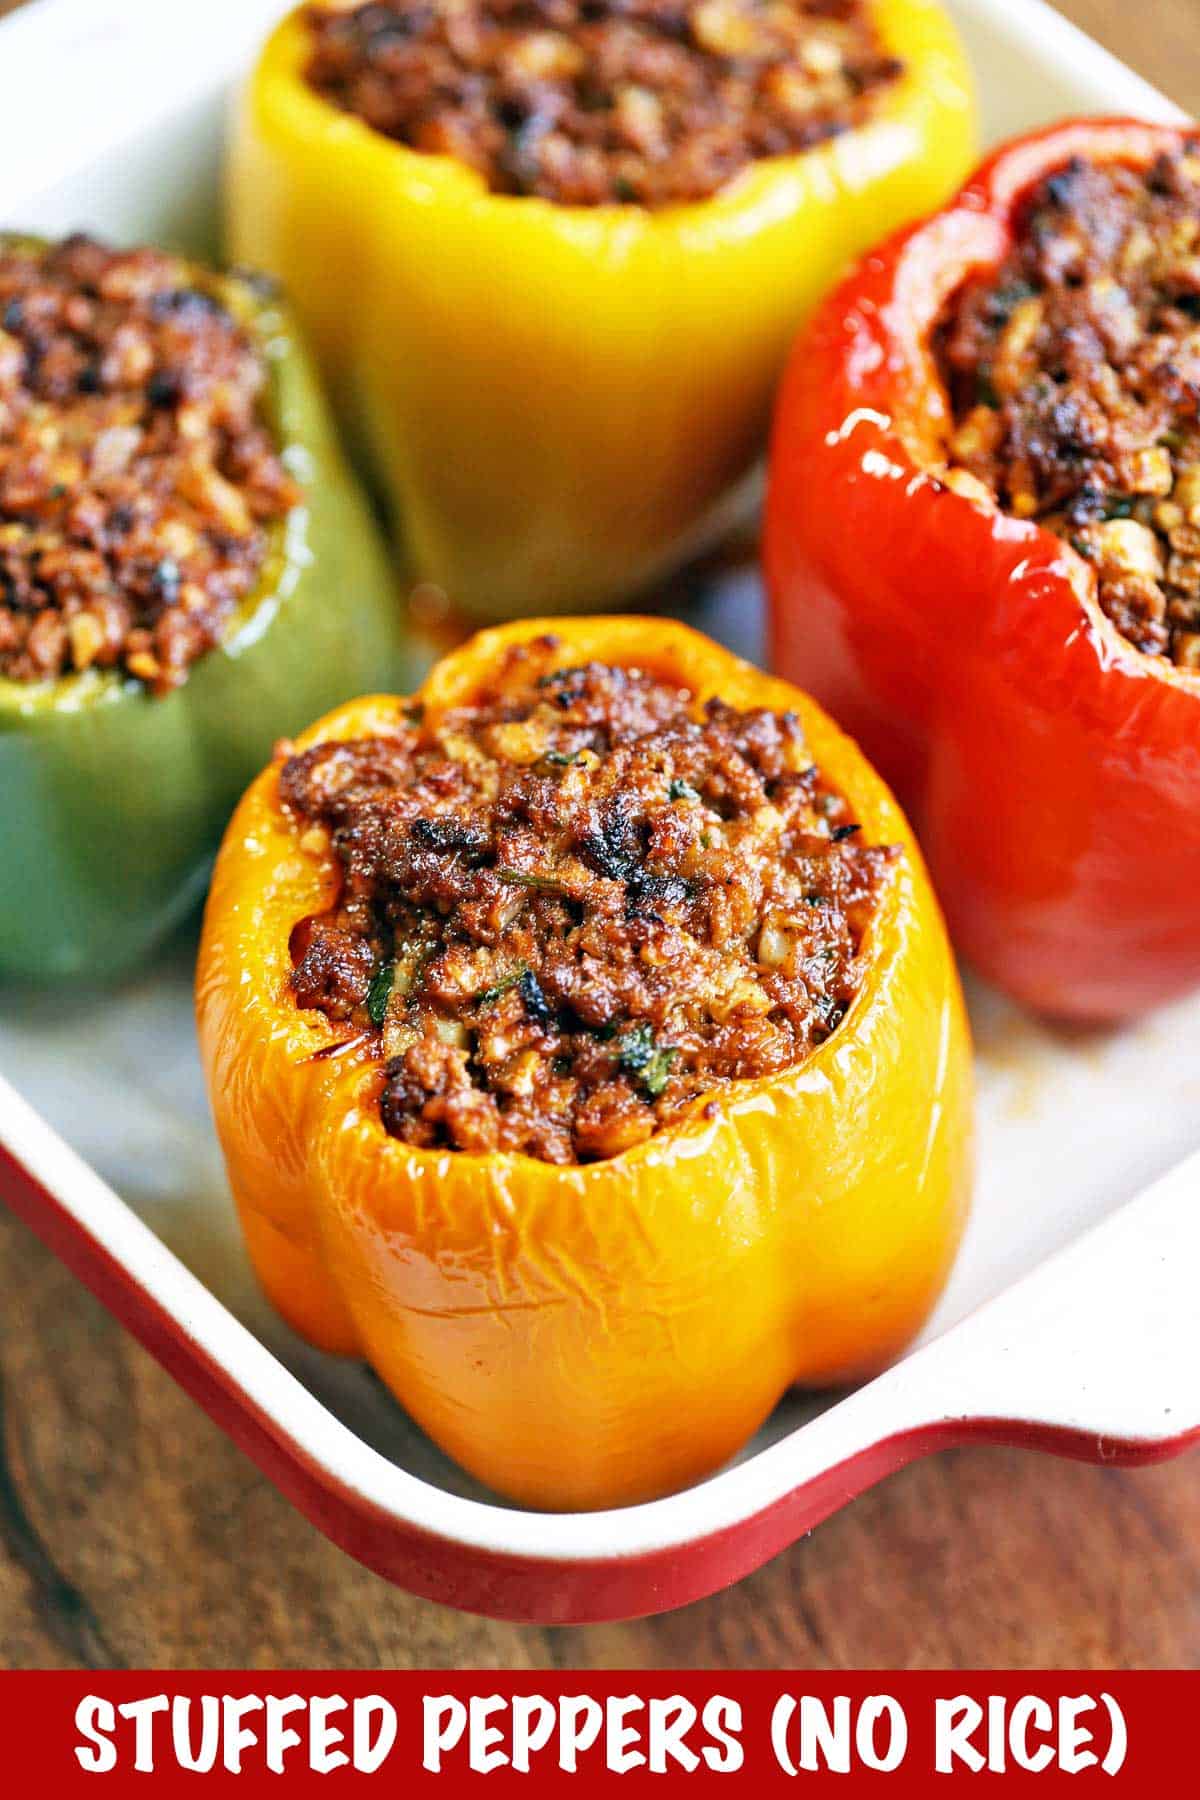 Stuffed peppers without rice served in a white baking dish.